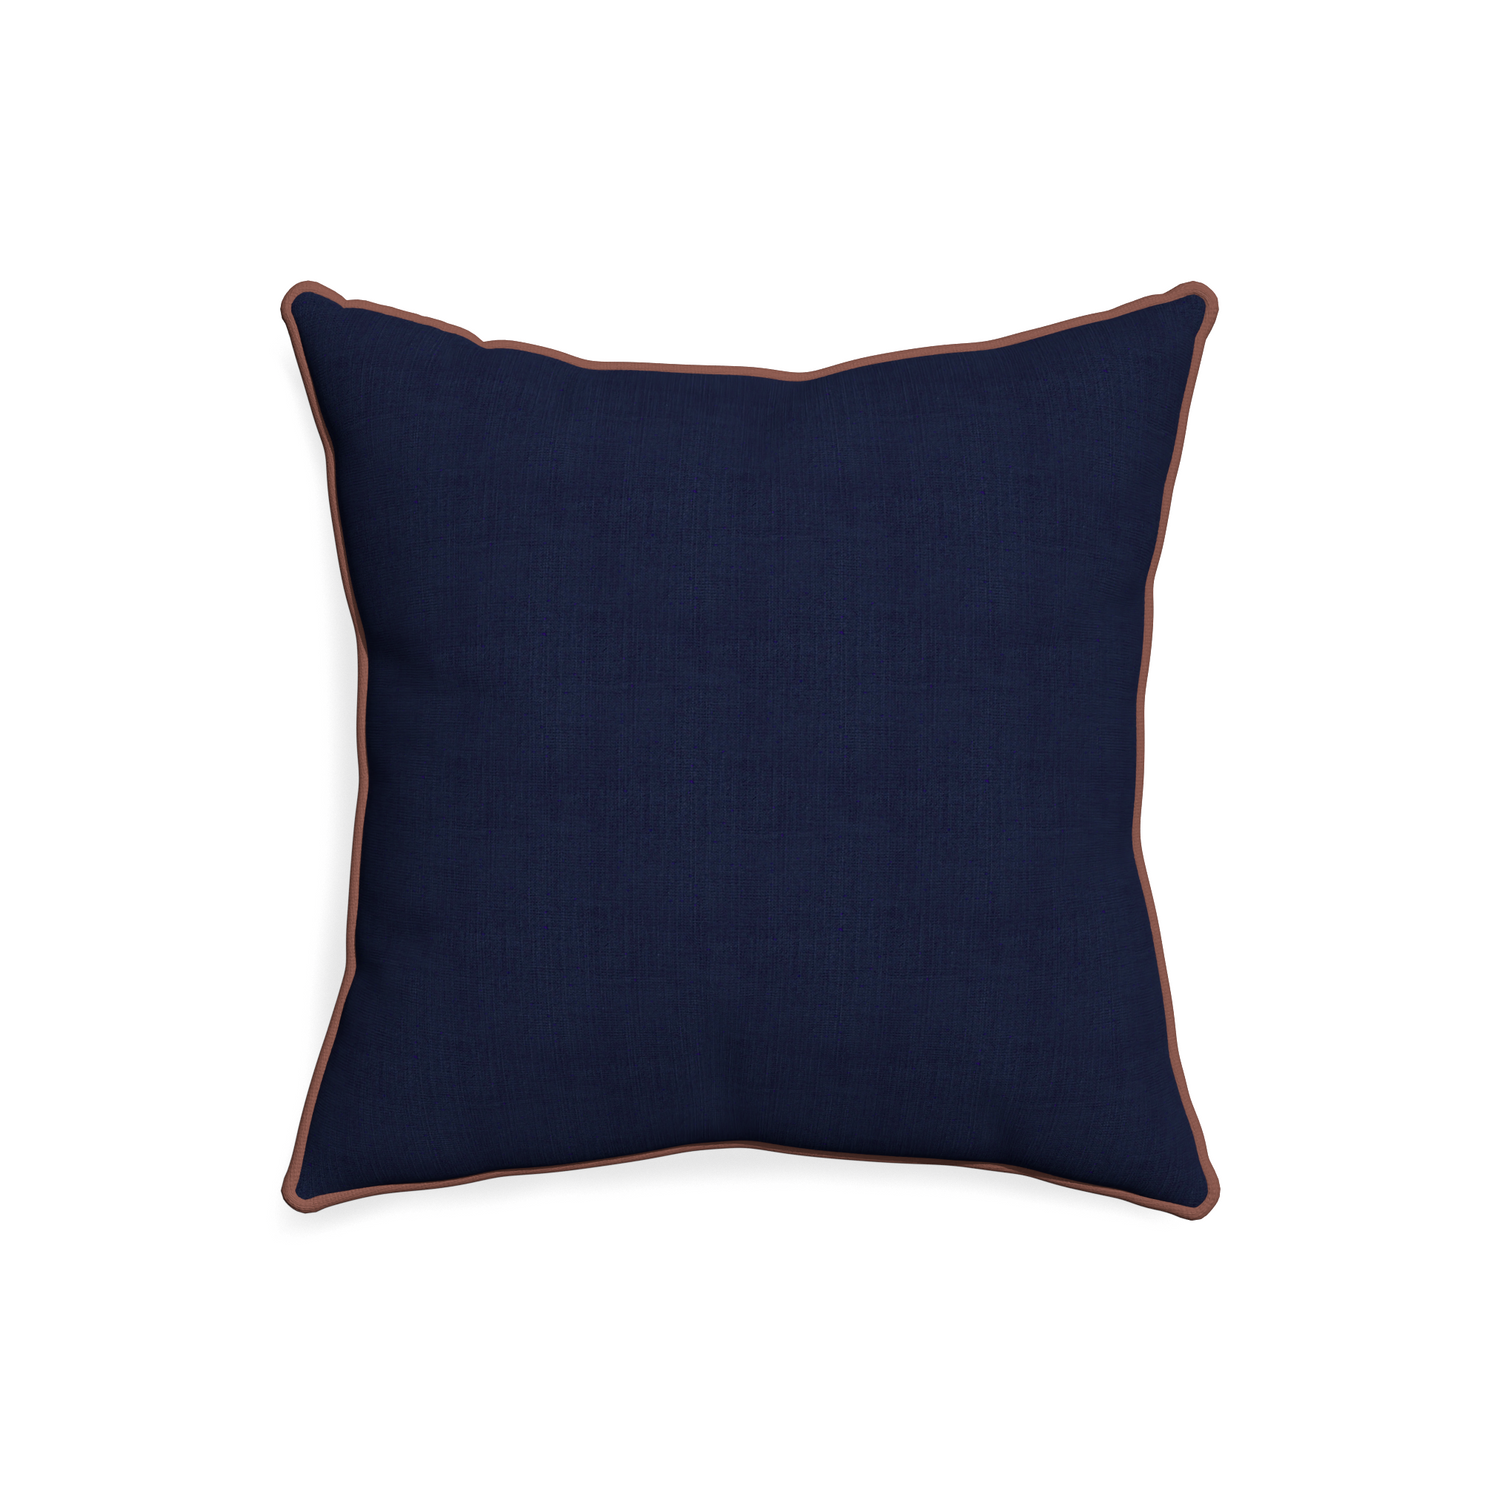 20-square midnight custom navy bluepillow with w piping on white background